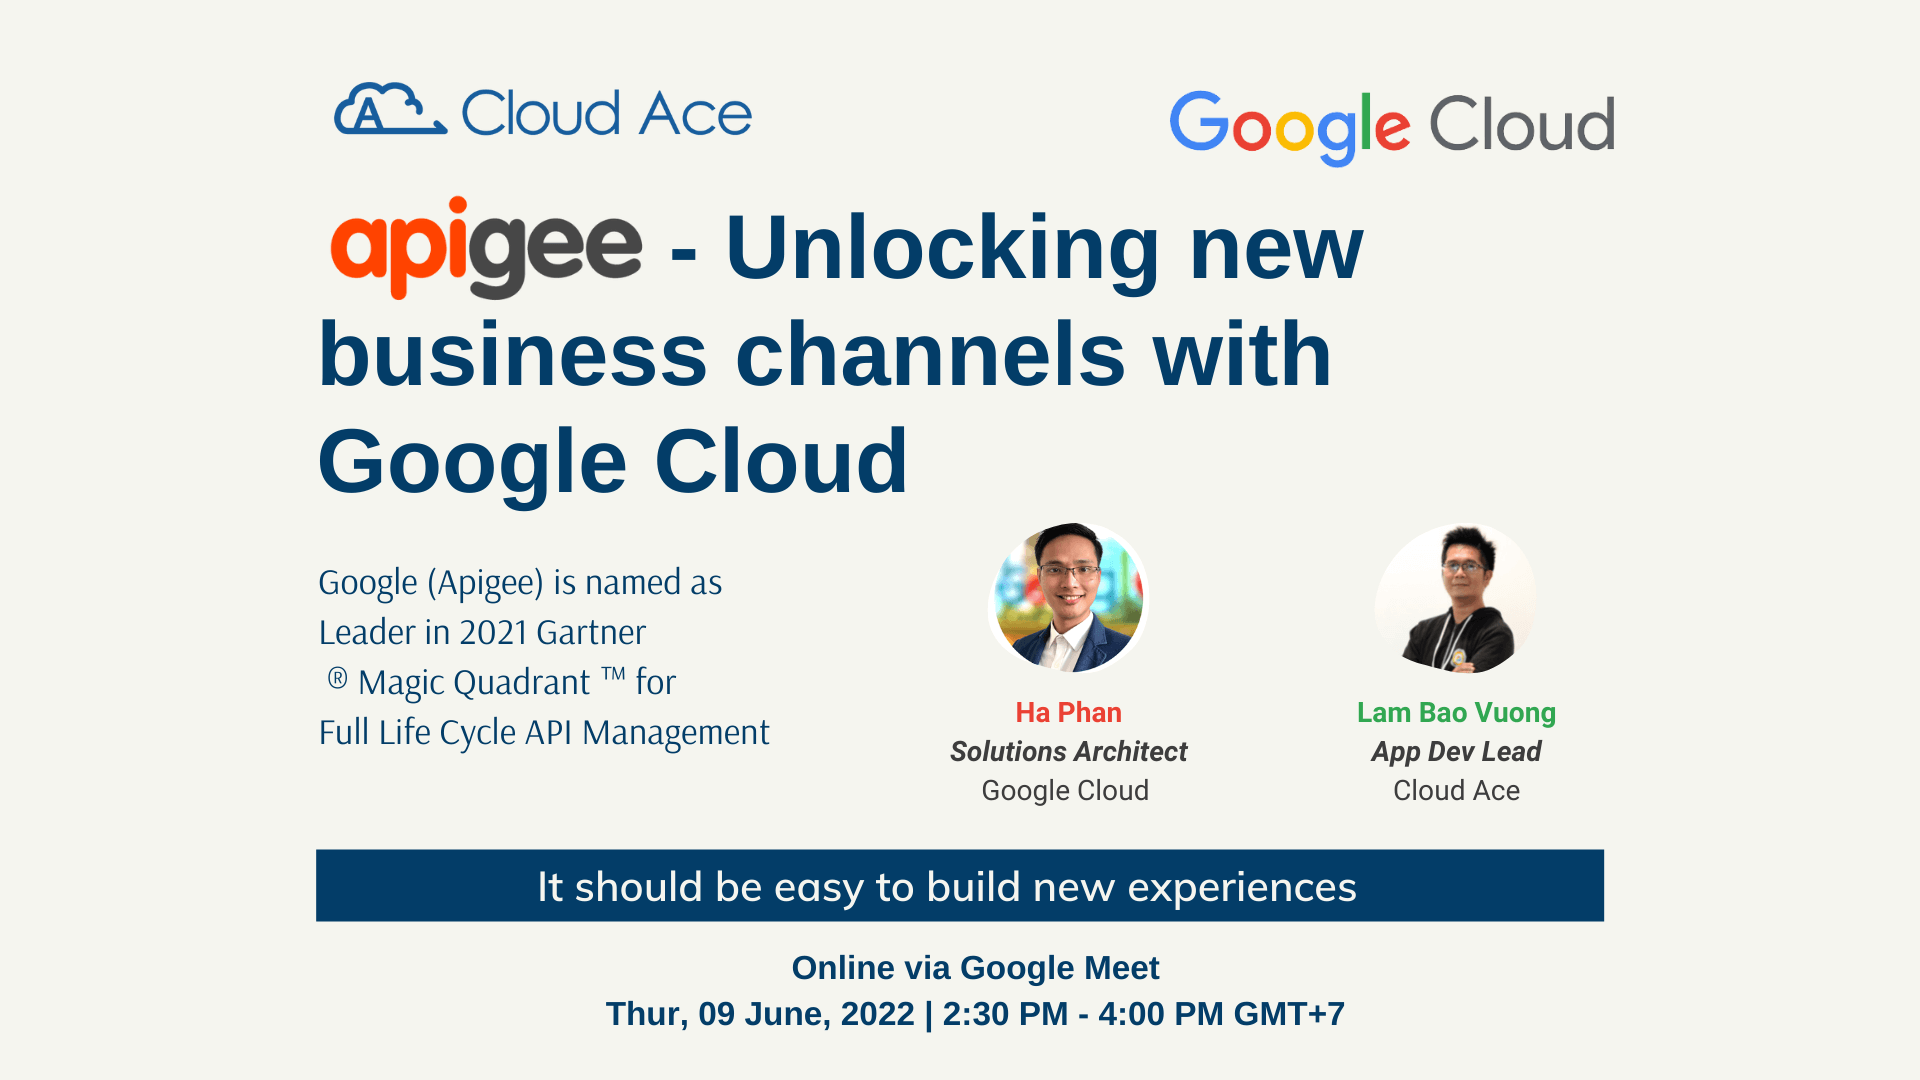 Apigee - Unlocking new business channels with Google Cloud